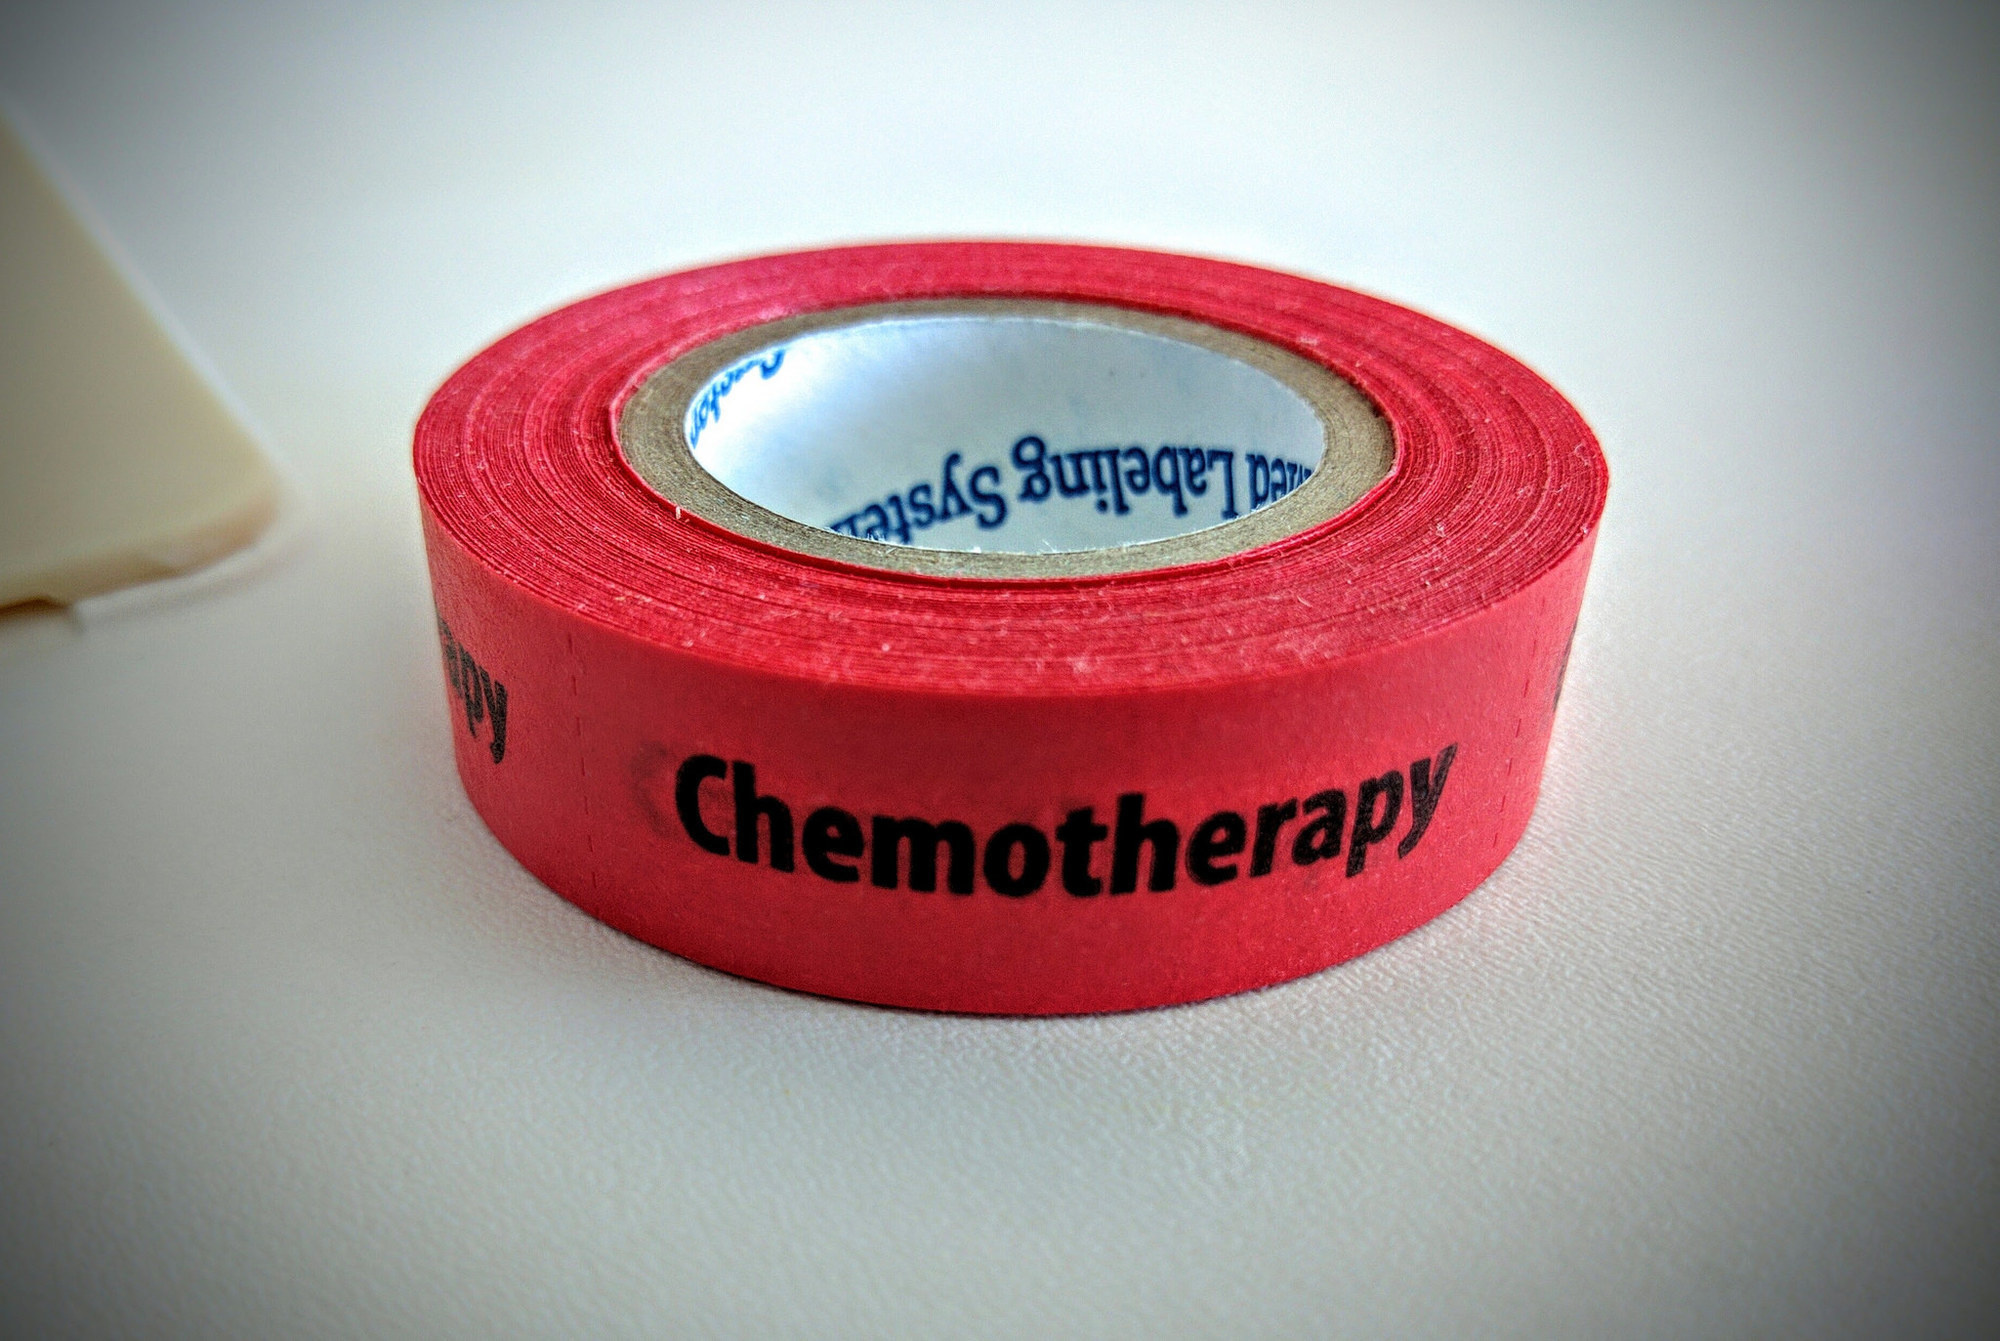 Chemotherapy - Chemotherapy ad Labeling System